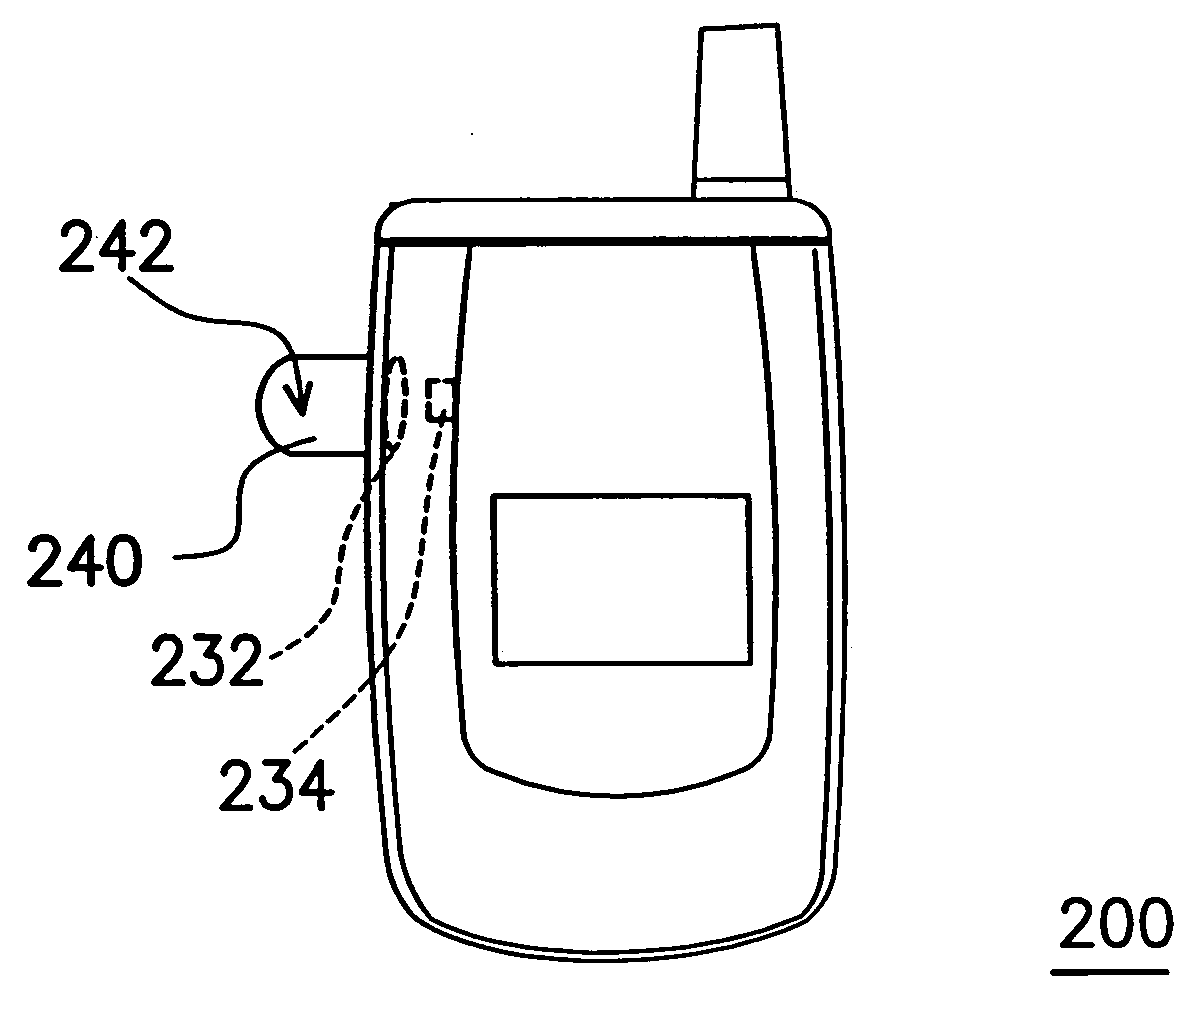 Handheld electronic device having a rotatable image-capturing device